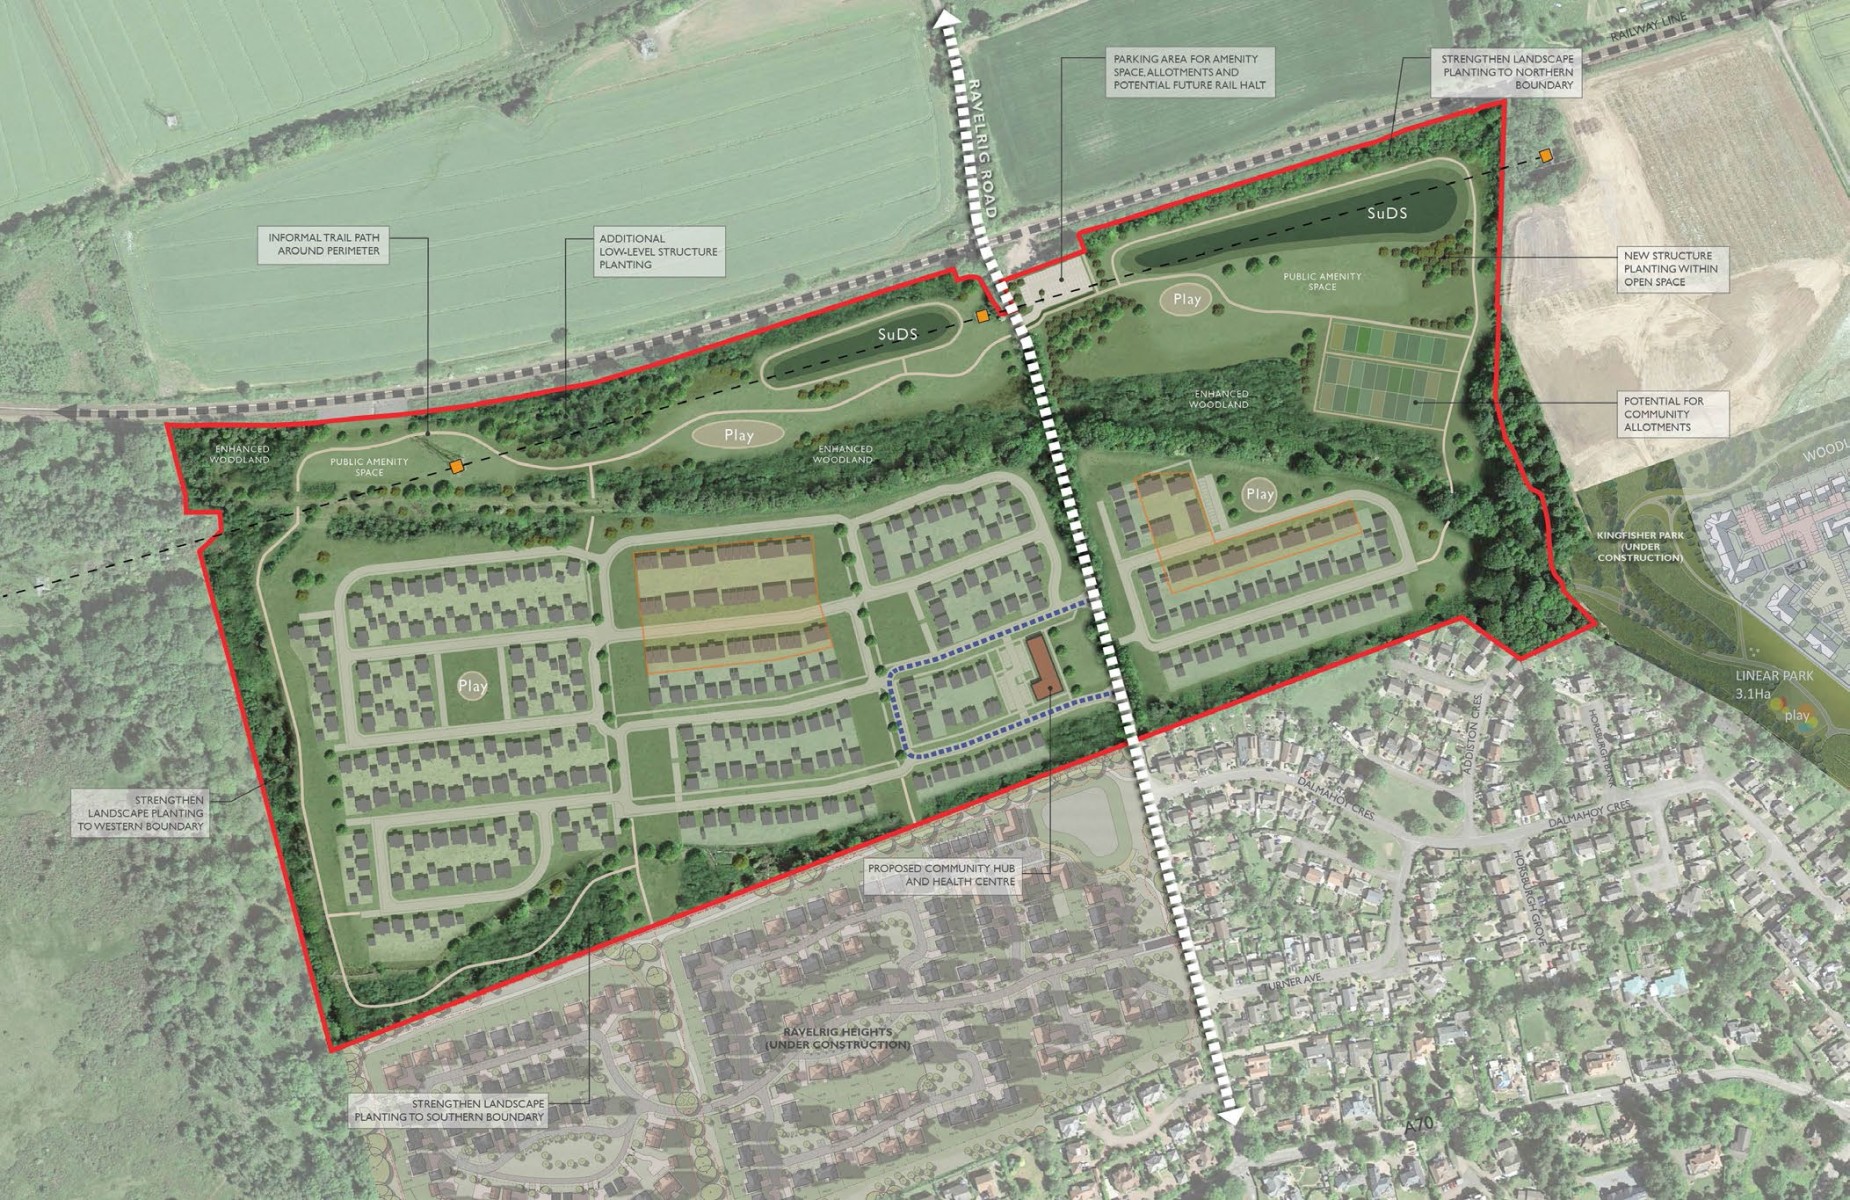 350-home plan rejected amid concerns residents would be too 'car dependant'